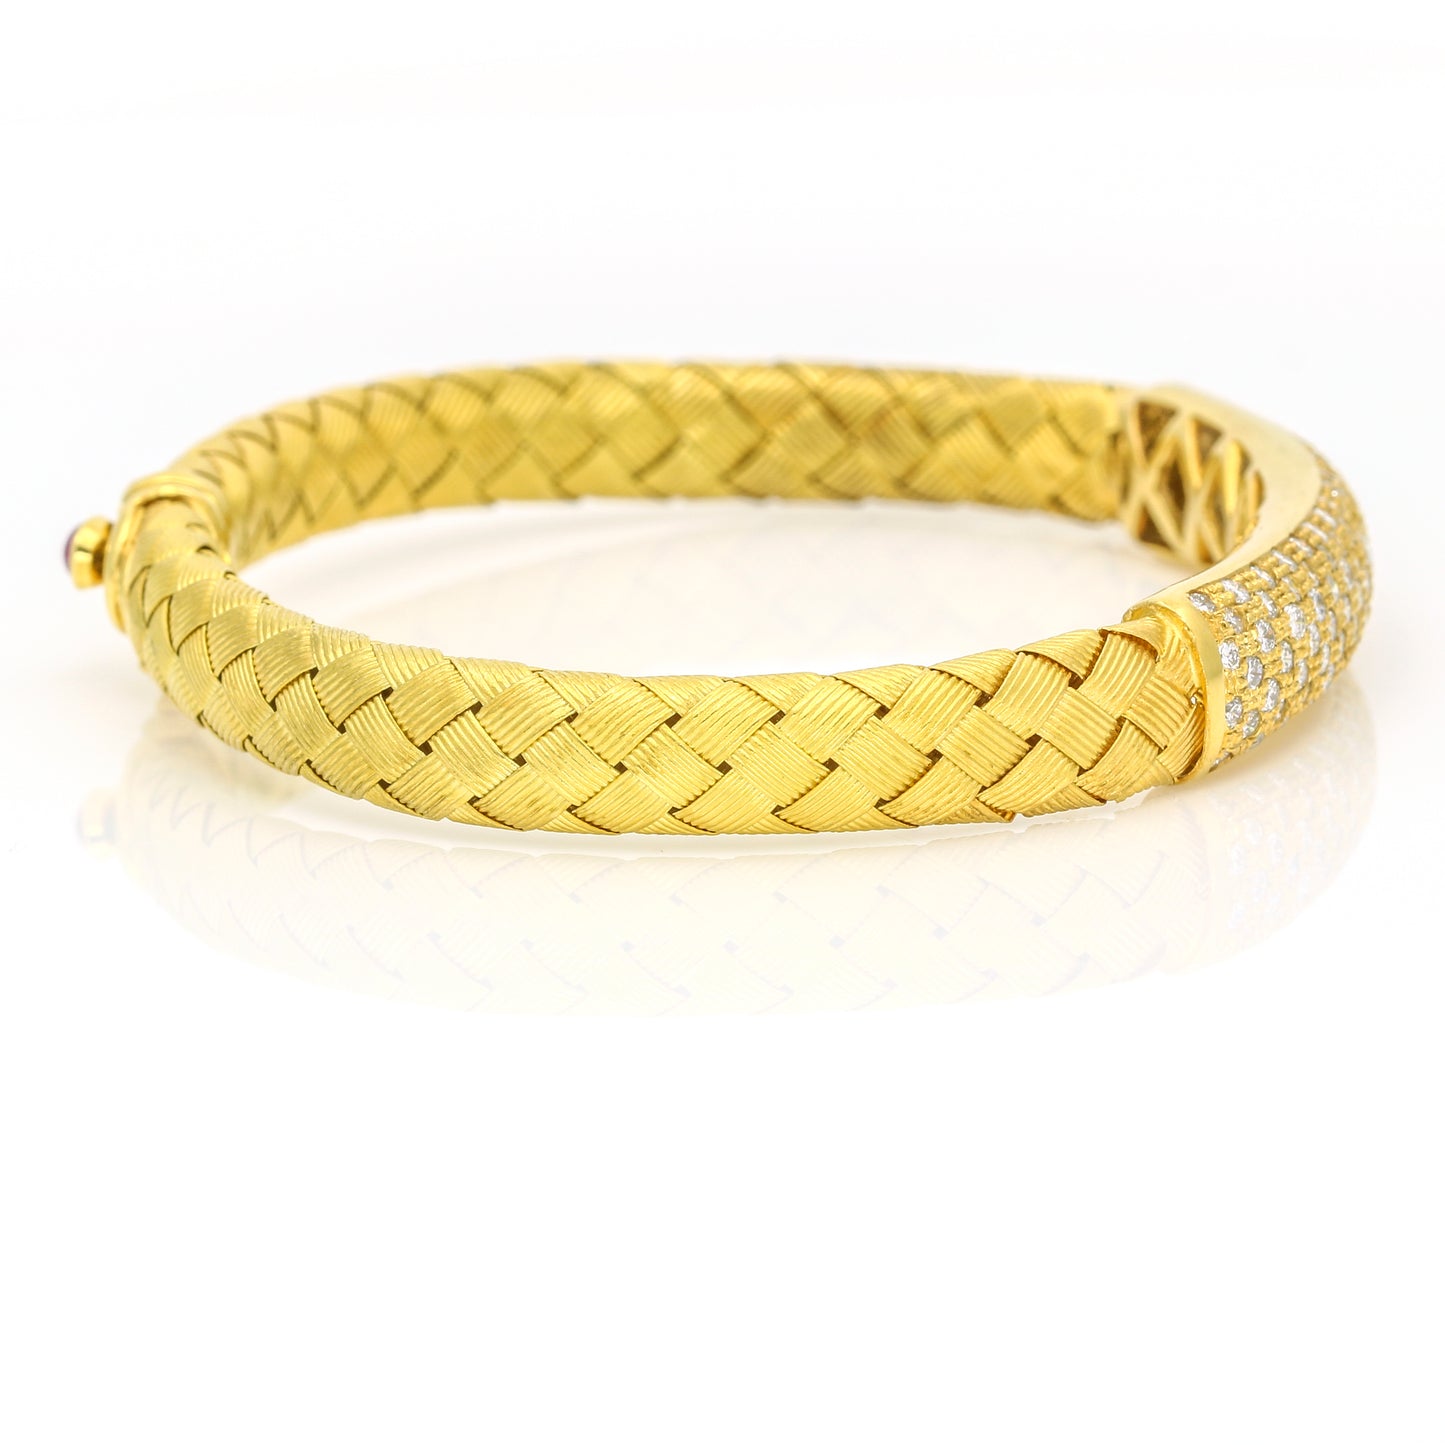 Pave Diamond ID Ruby Woven Bracelet in 18k Yellow Gold Size Large